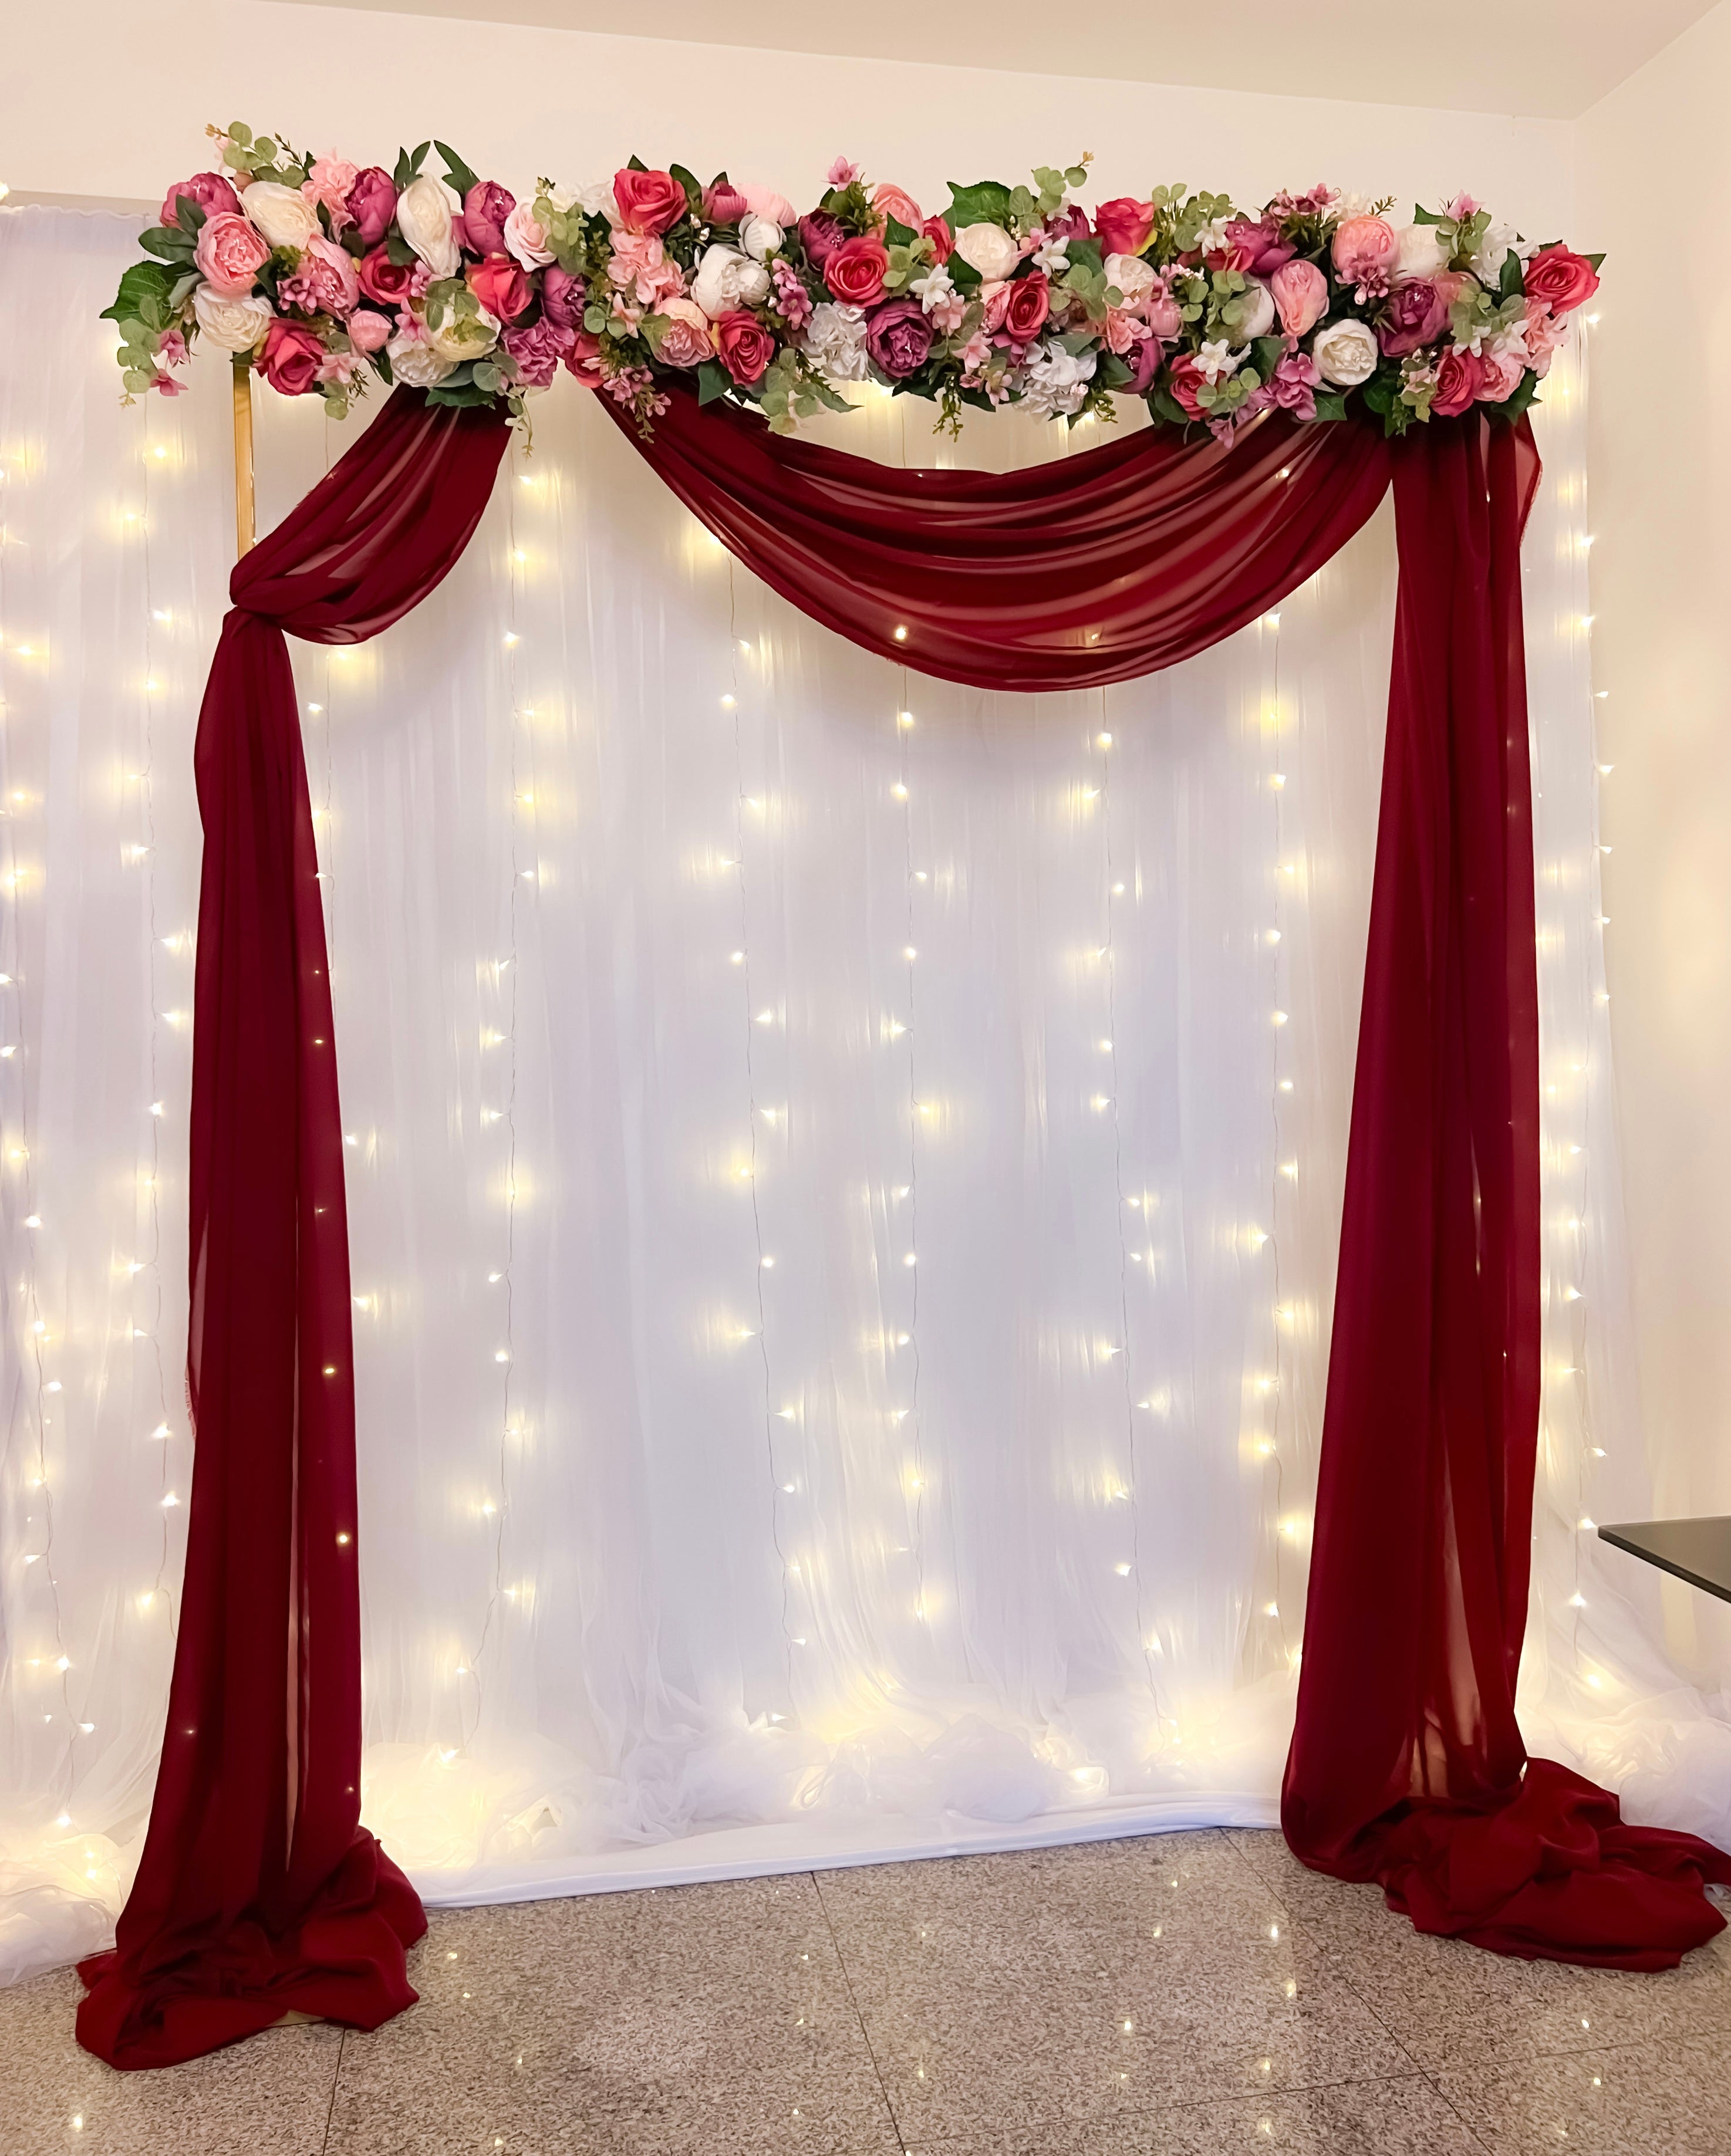 Affordable Wedding/ Solemnisation Decor in Singapore - Pink White Red Floral Arch with Fairy-lights Backdrop